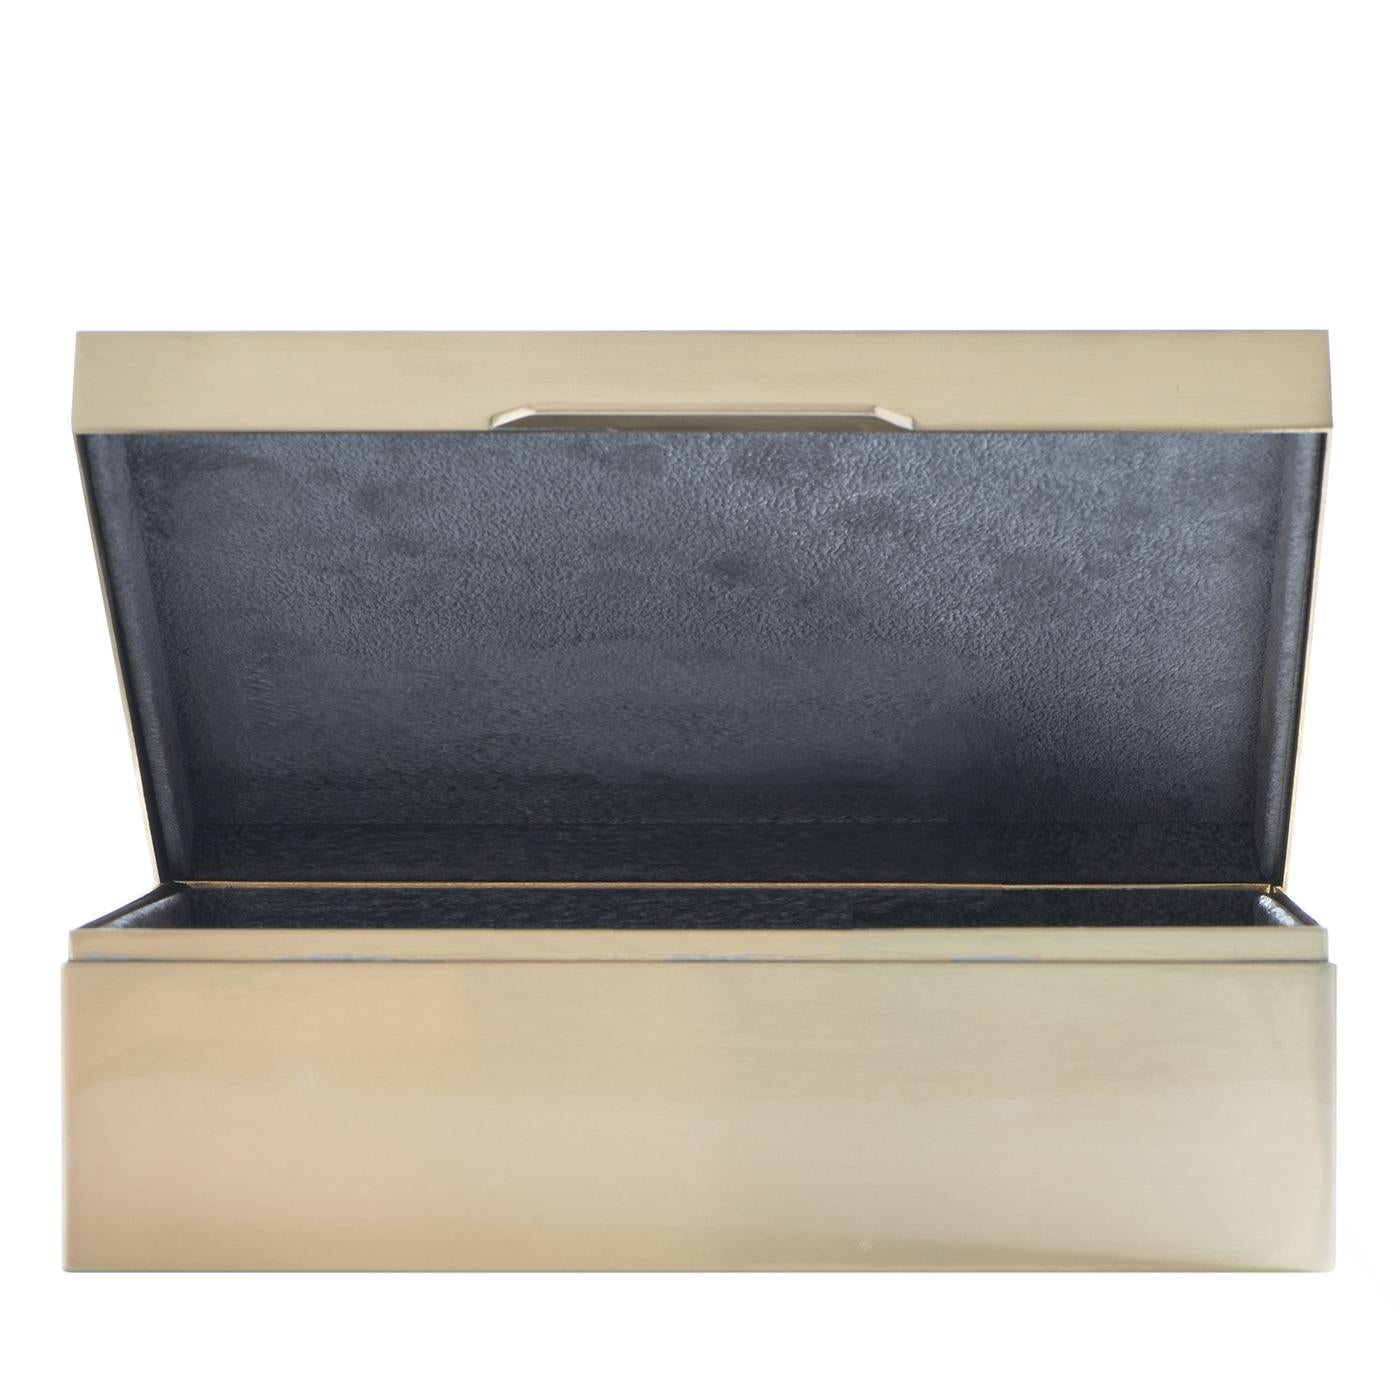 Lined in velvet and topped with a beetle, this box has everything required to keep precious objects safe. An eye-catching accent for any space, the brass box is designed and crafted in Florence by Badari, true luxury experts. Place it on a side